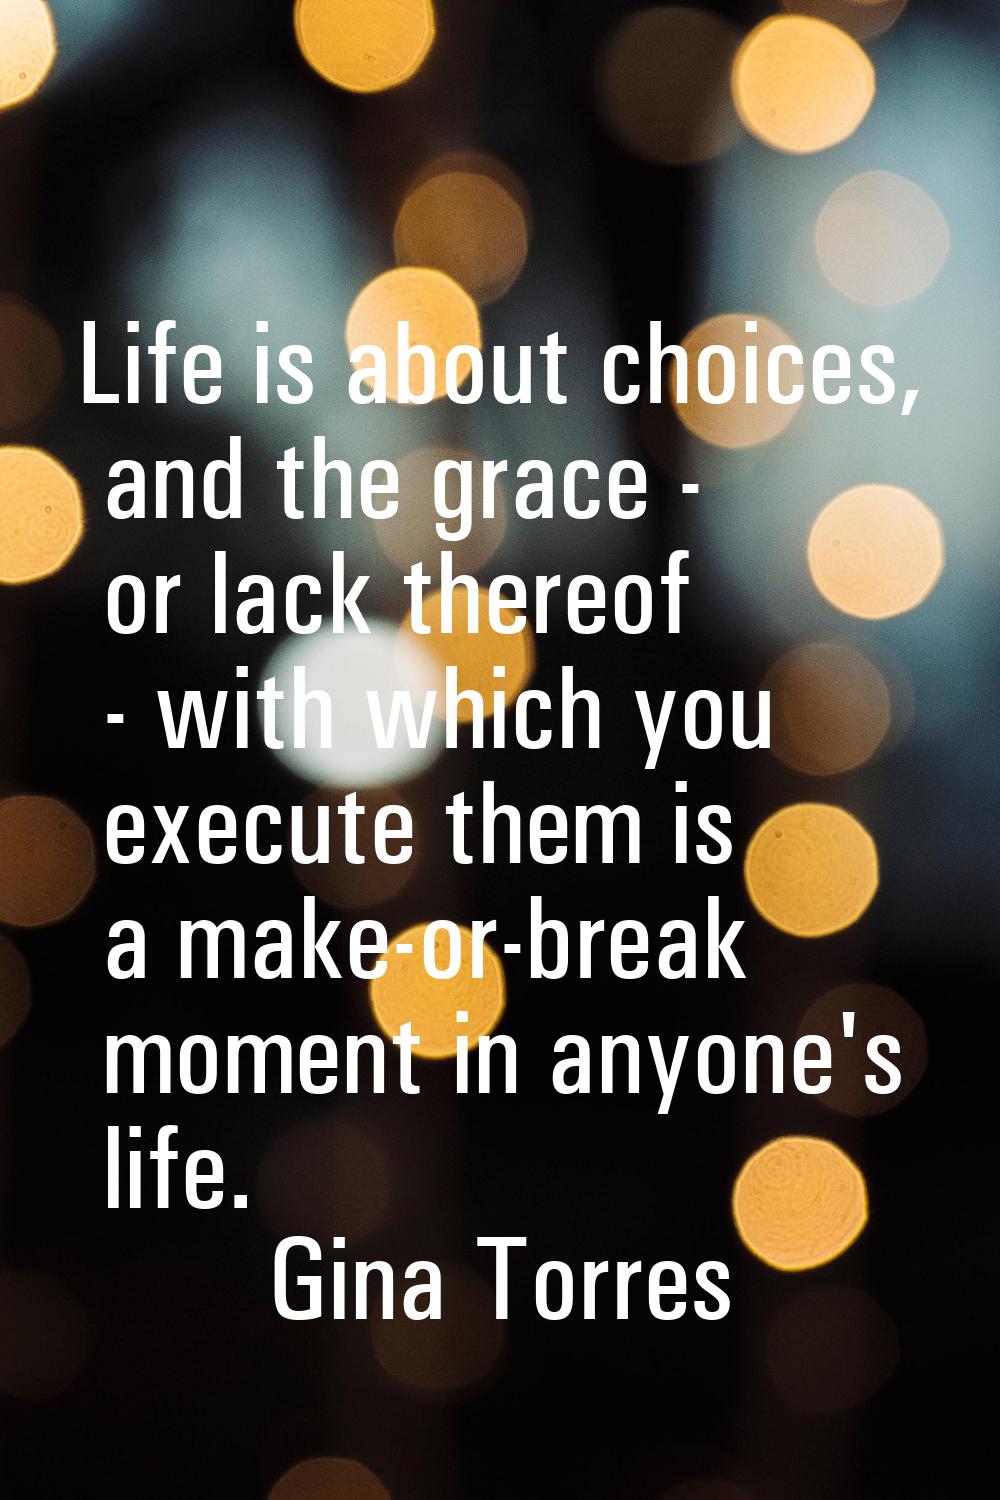 Life is about choices, and the grace - or lack thereof - with which you execute them is a make-or-b